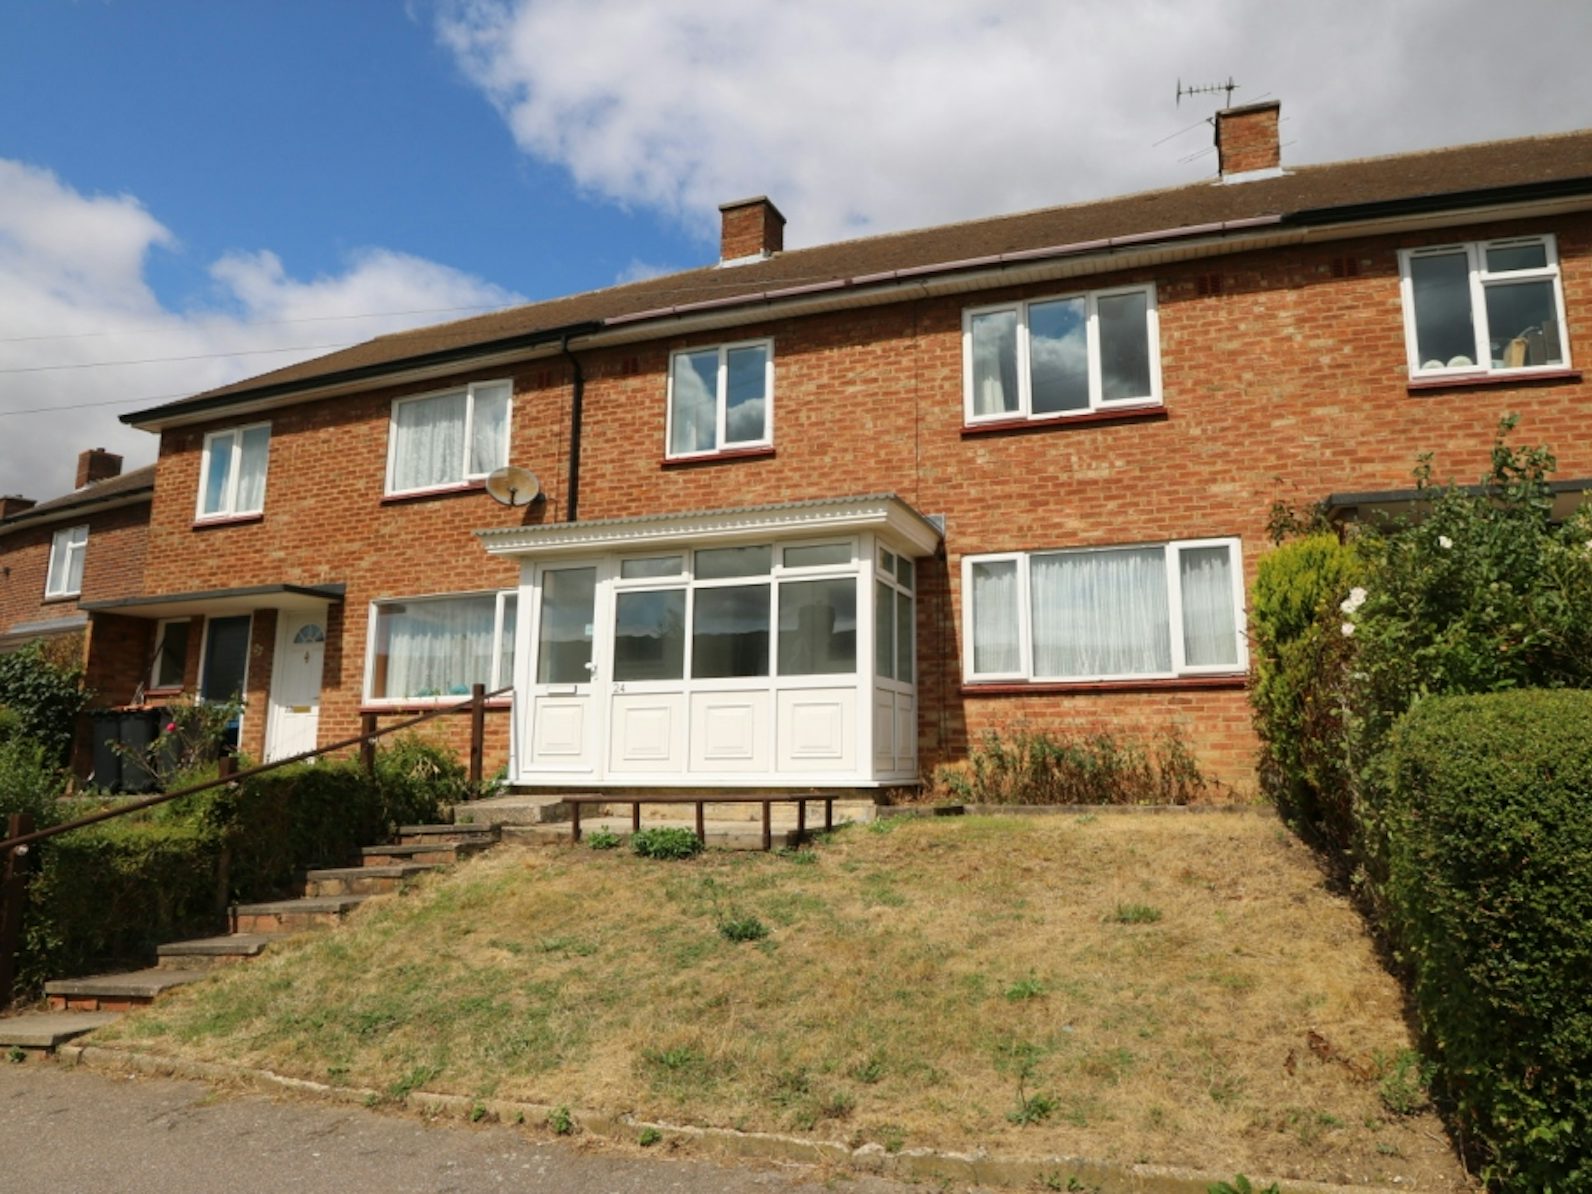 Terraced House for sale on Roundmead Bedford, MK41